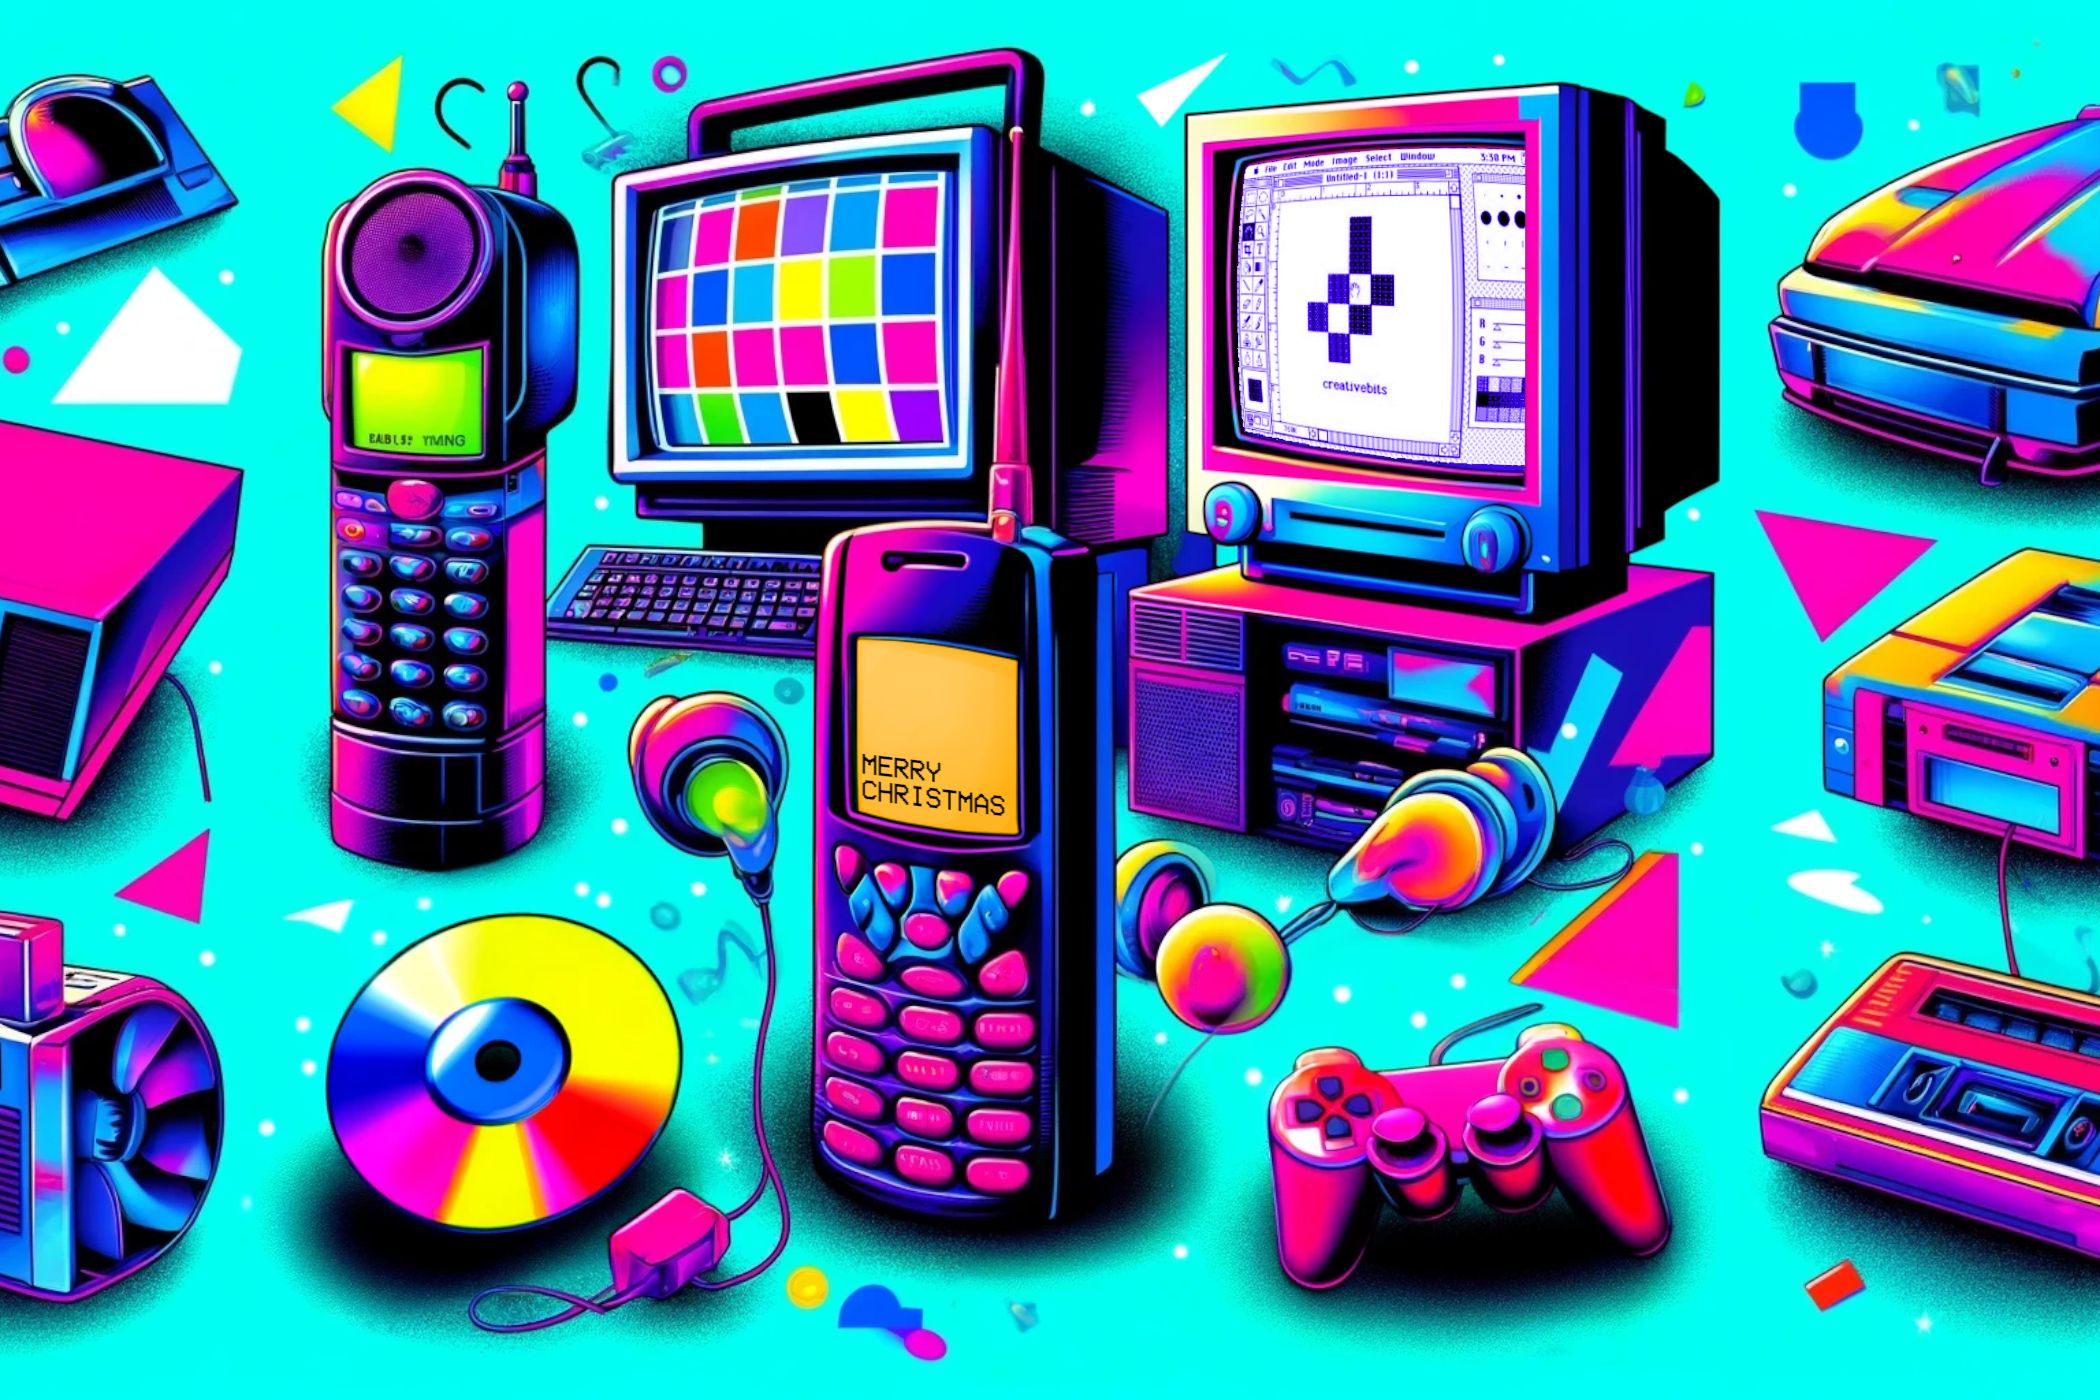 1990s gadgets in vibrant colors.